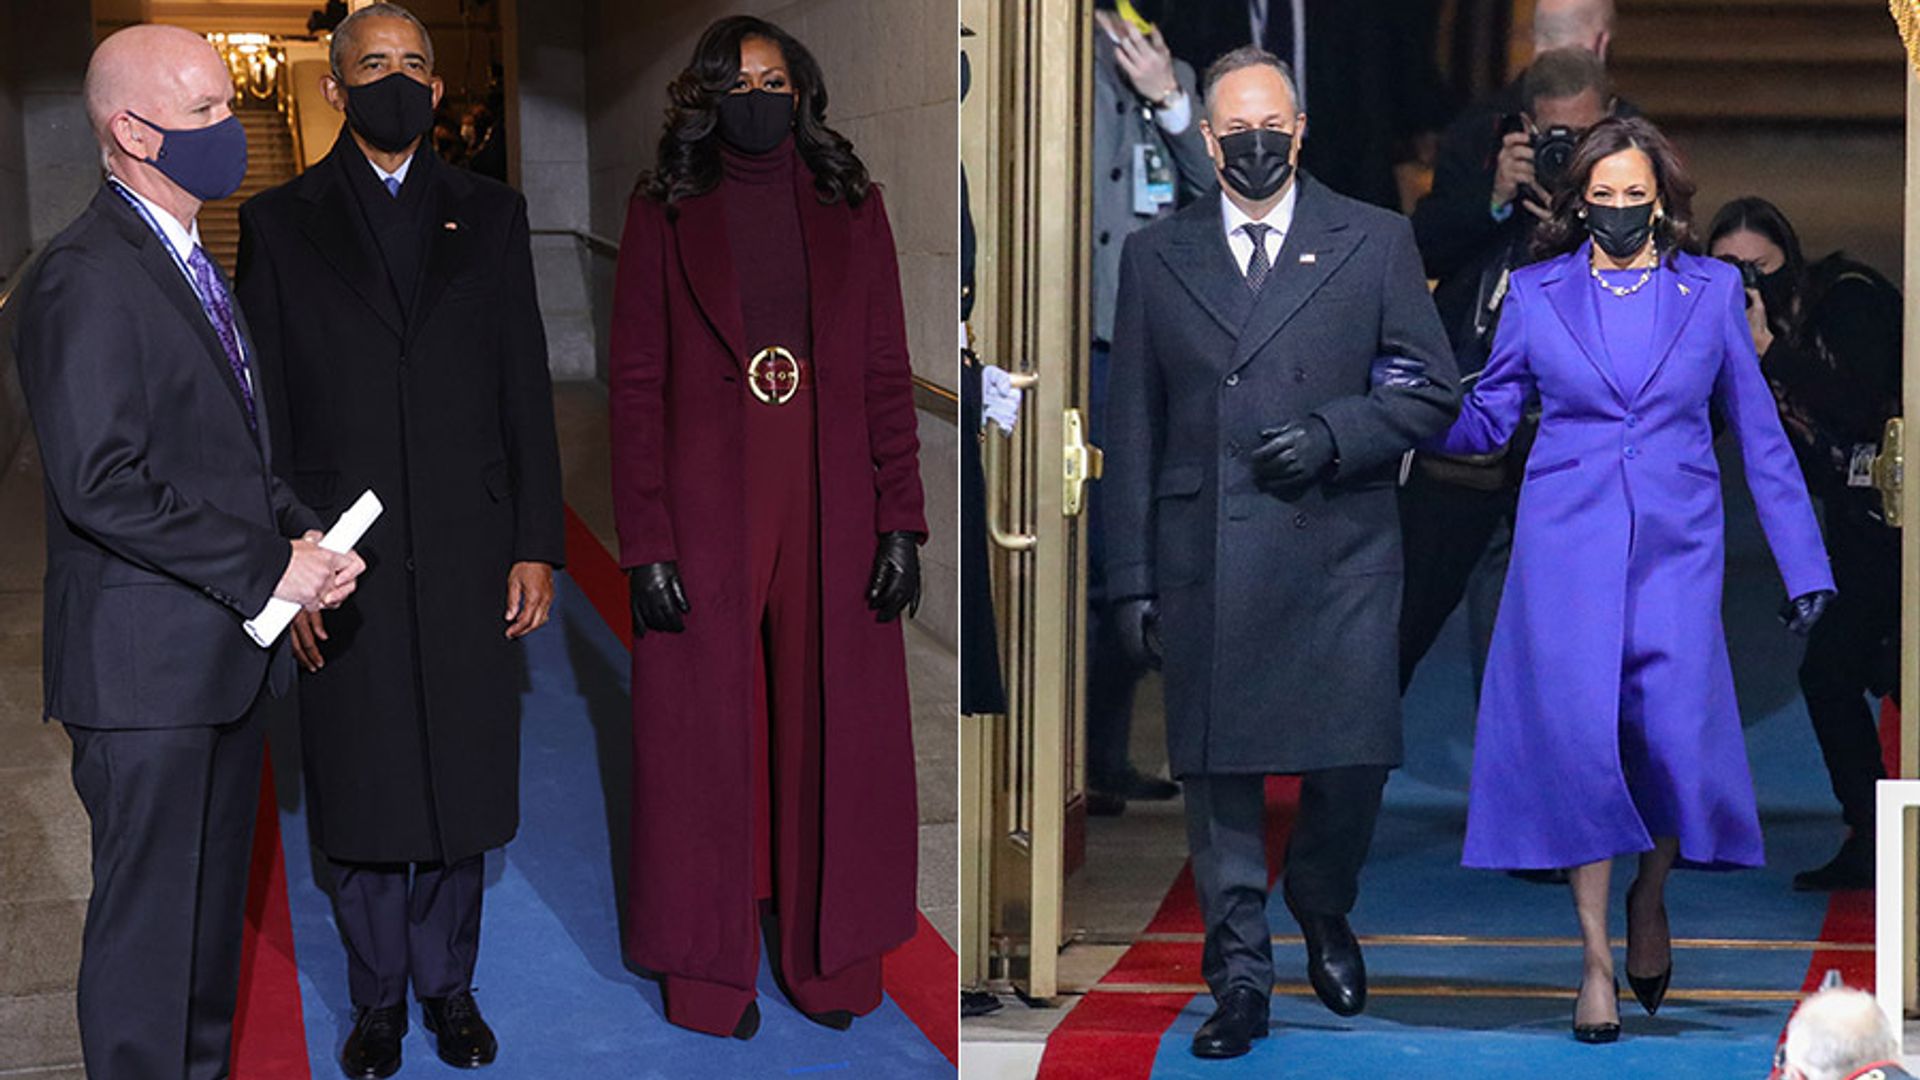 Michelle Obama and Kamala Harris support Black American designers at presidential inauguration